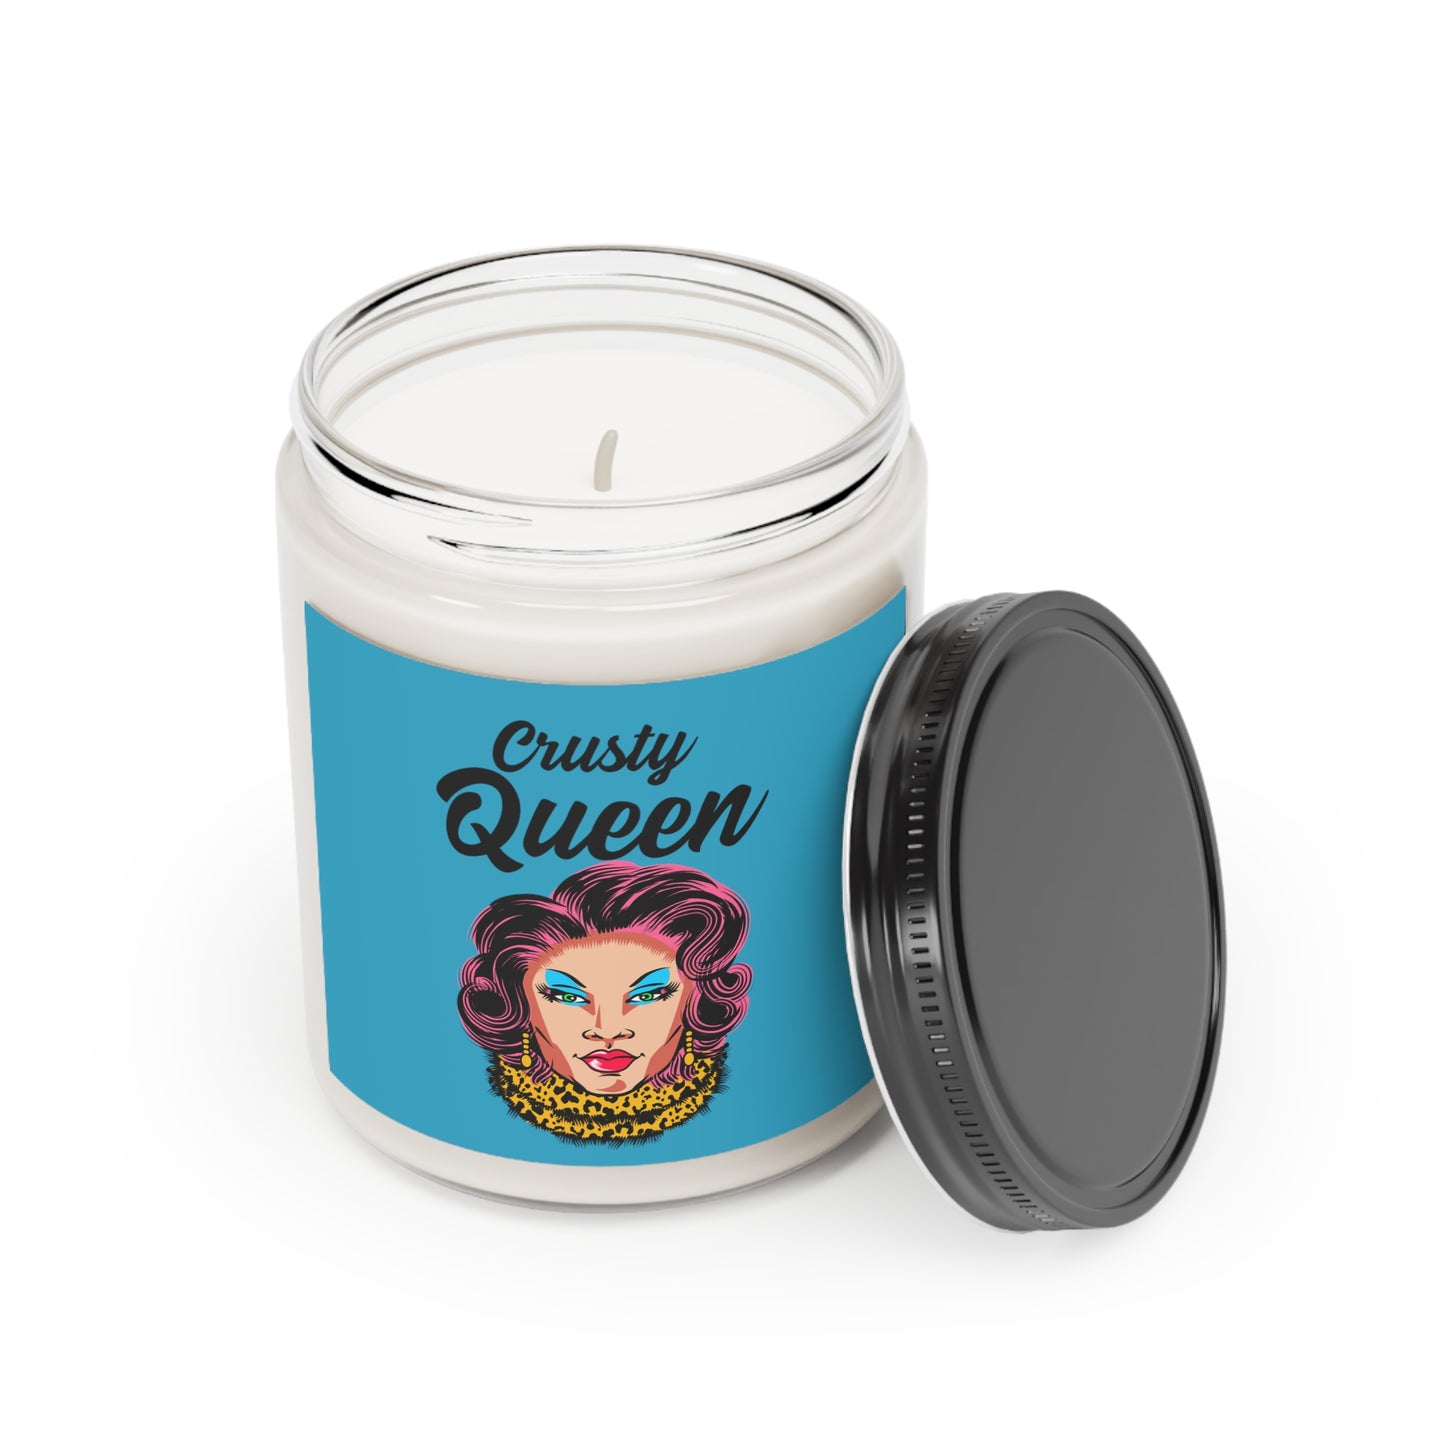 Crusty Queen Scented Candle